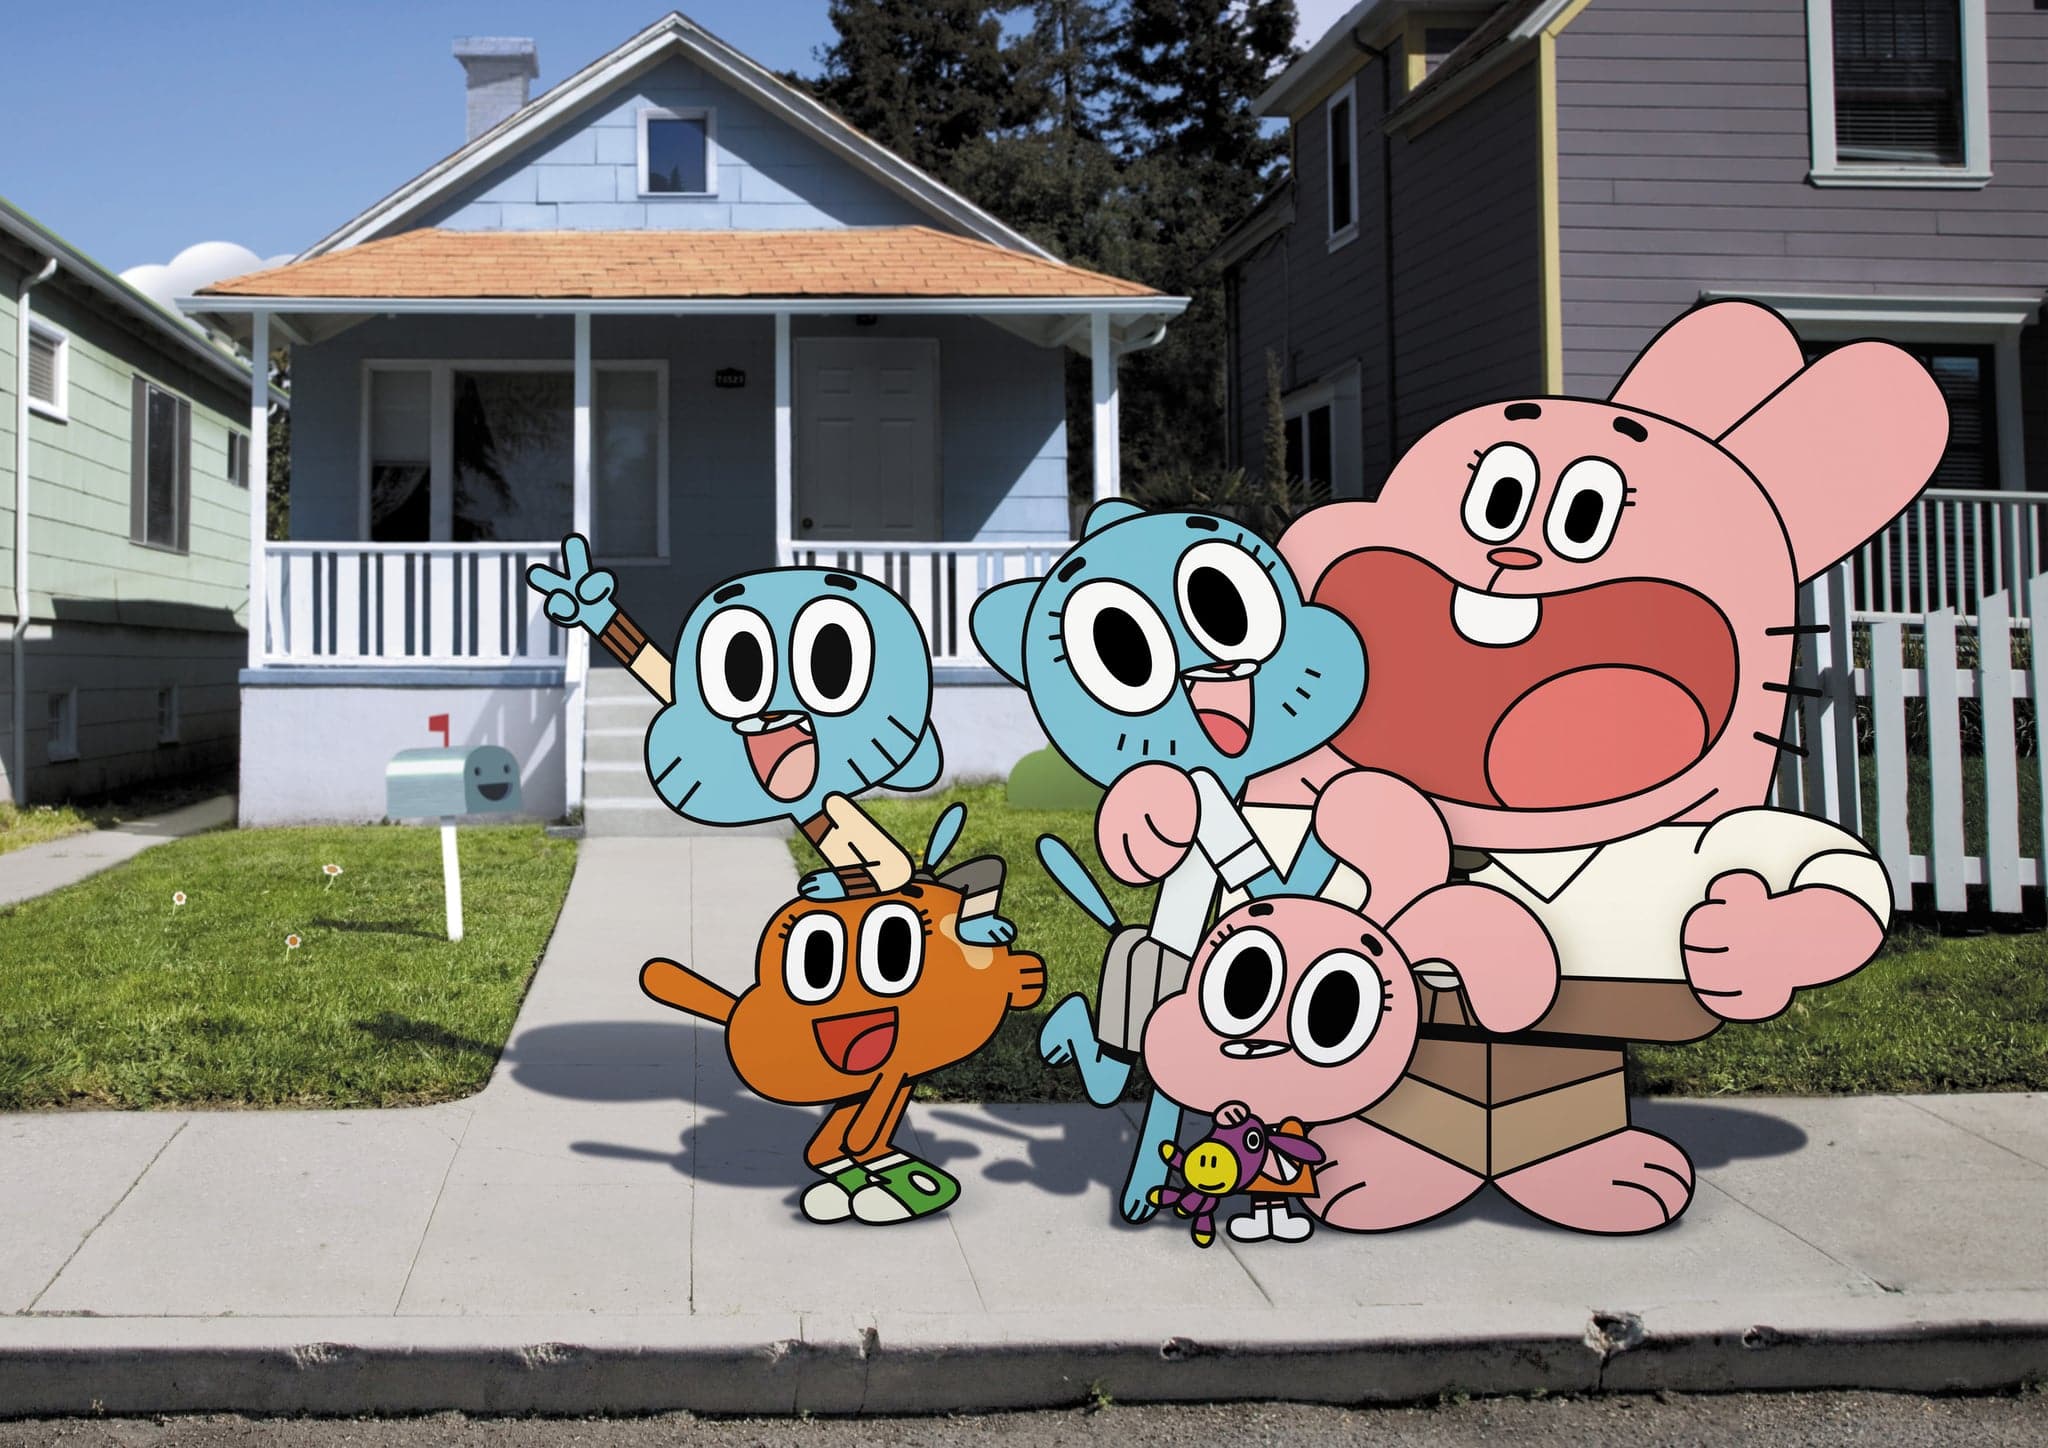 Video: Preview the return of 'Amazing World of Gumball